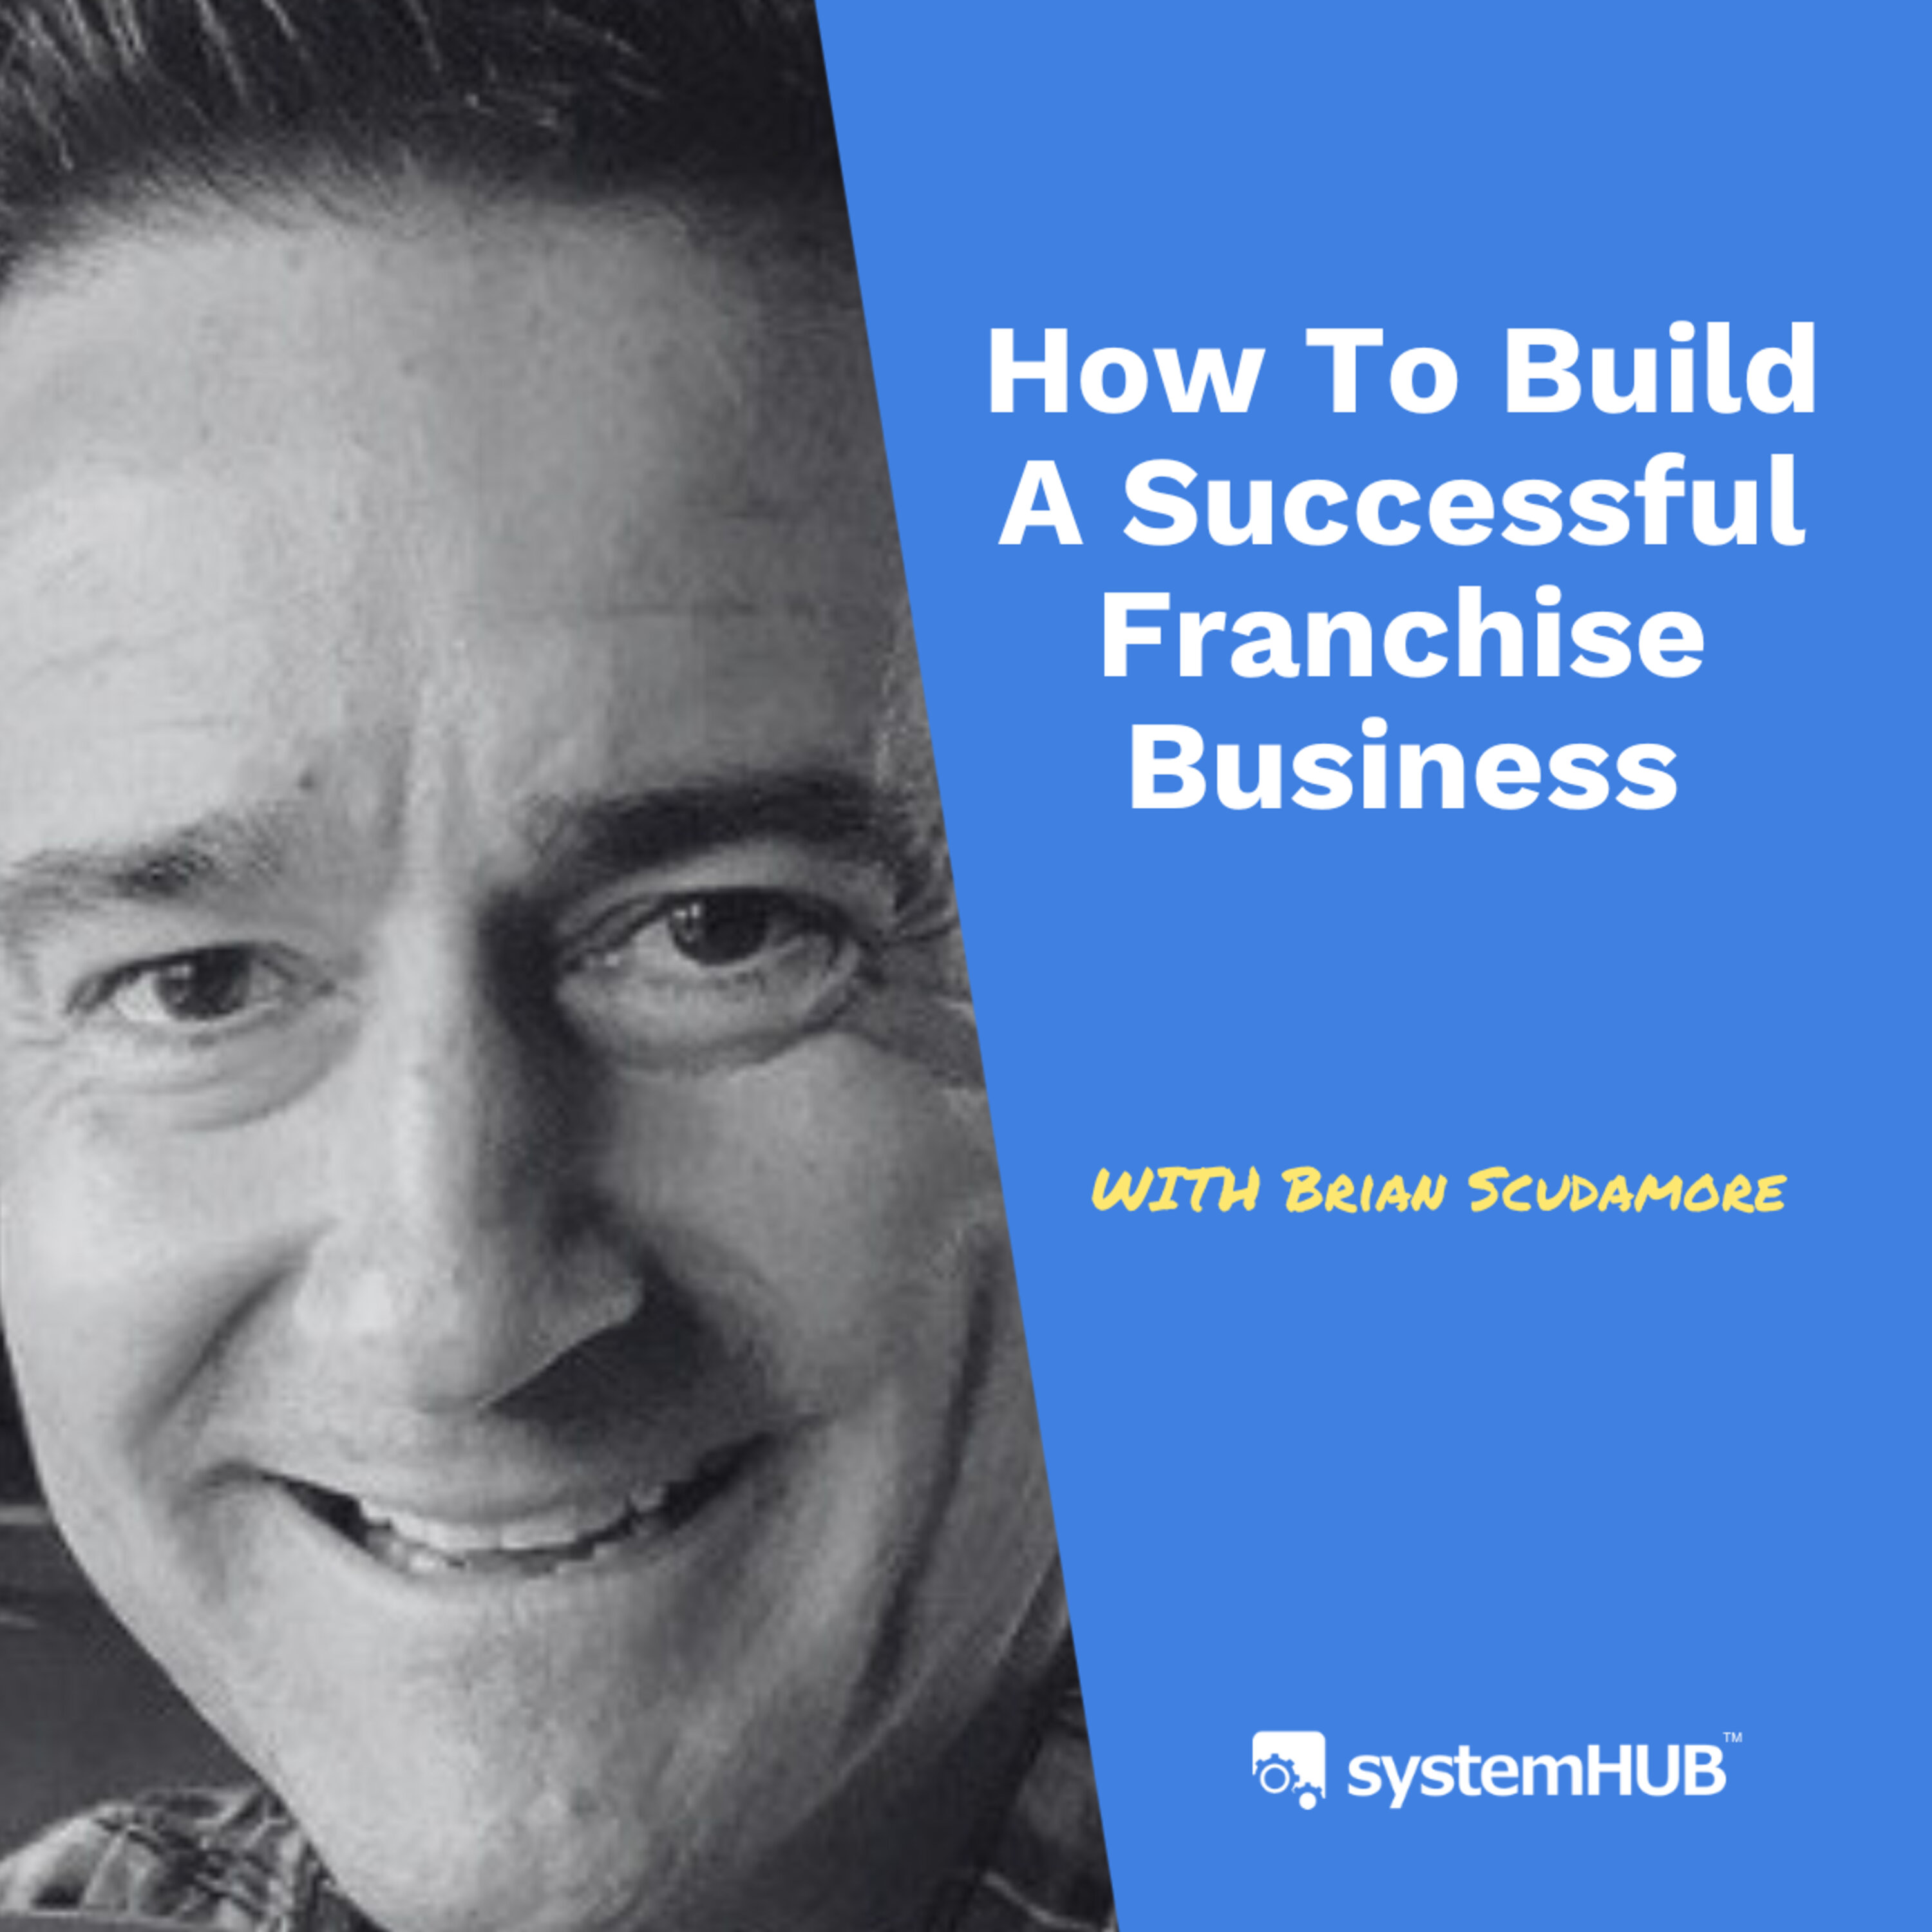 How To Build A Successful Franchise Business with Brian Scudamore